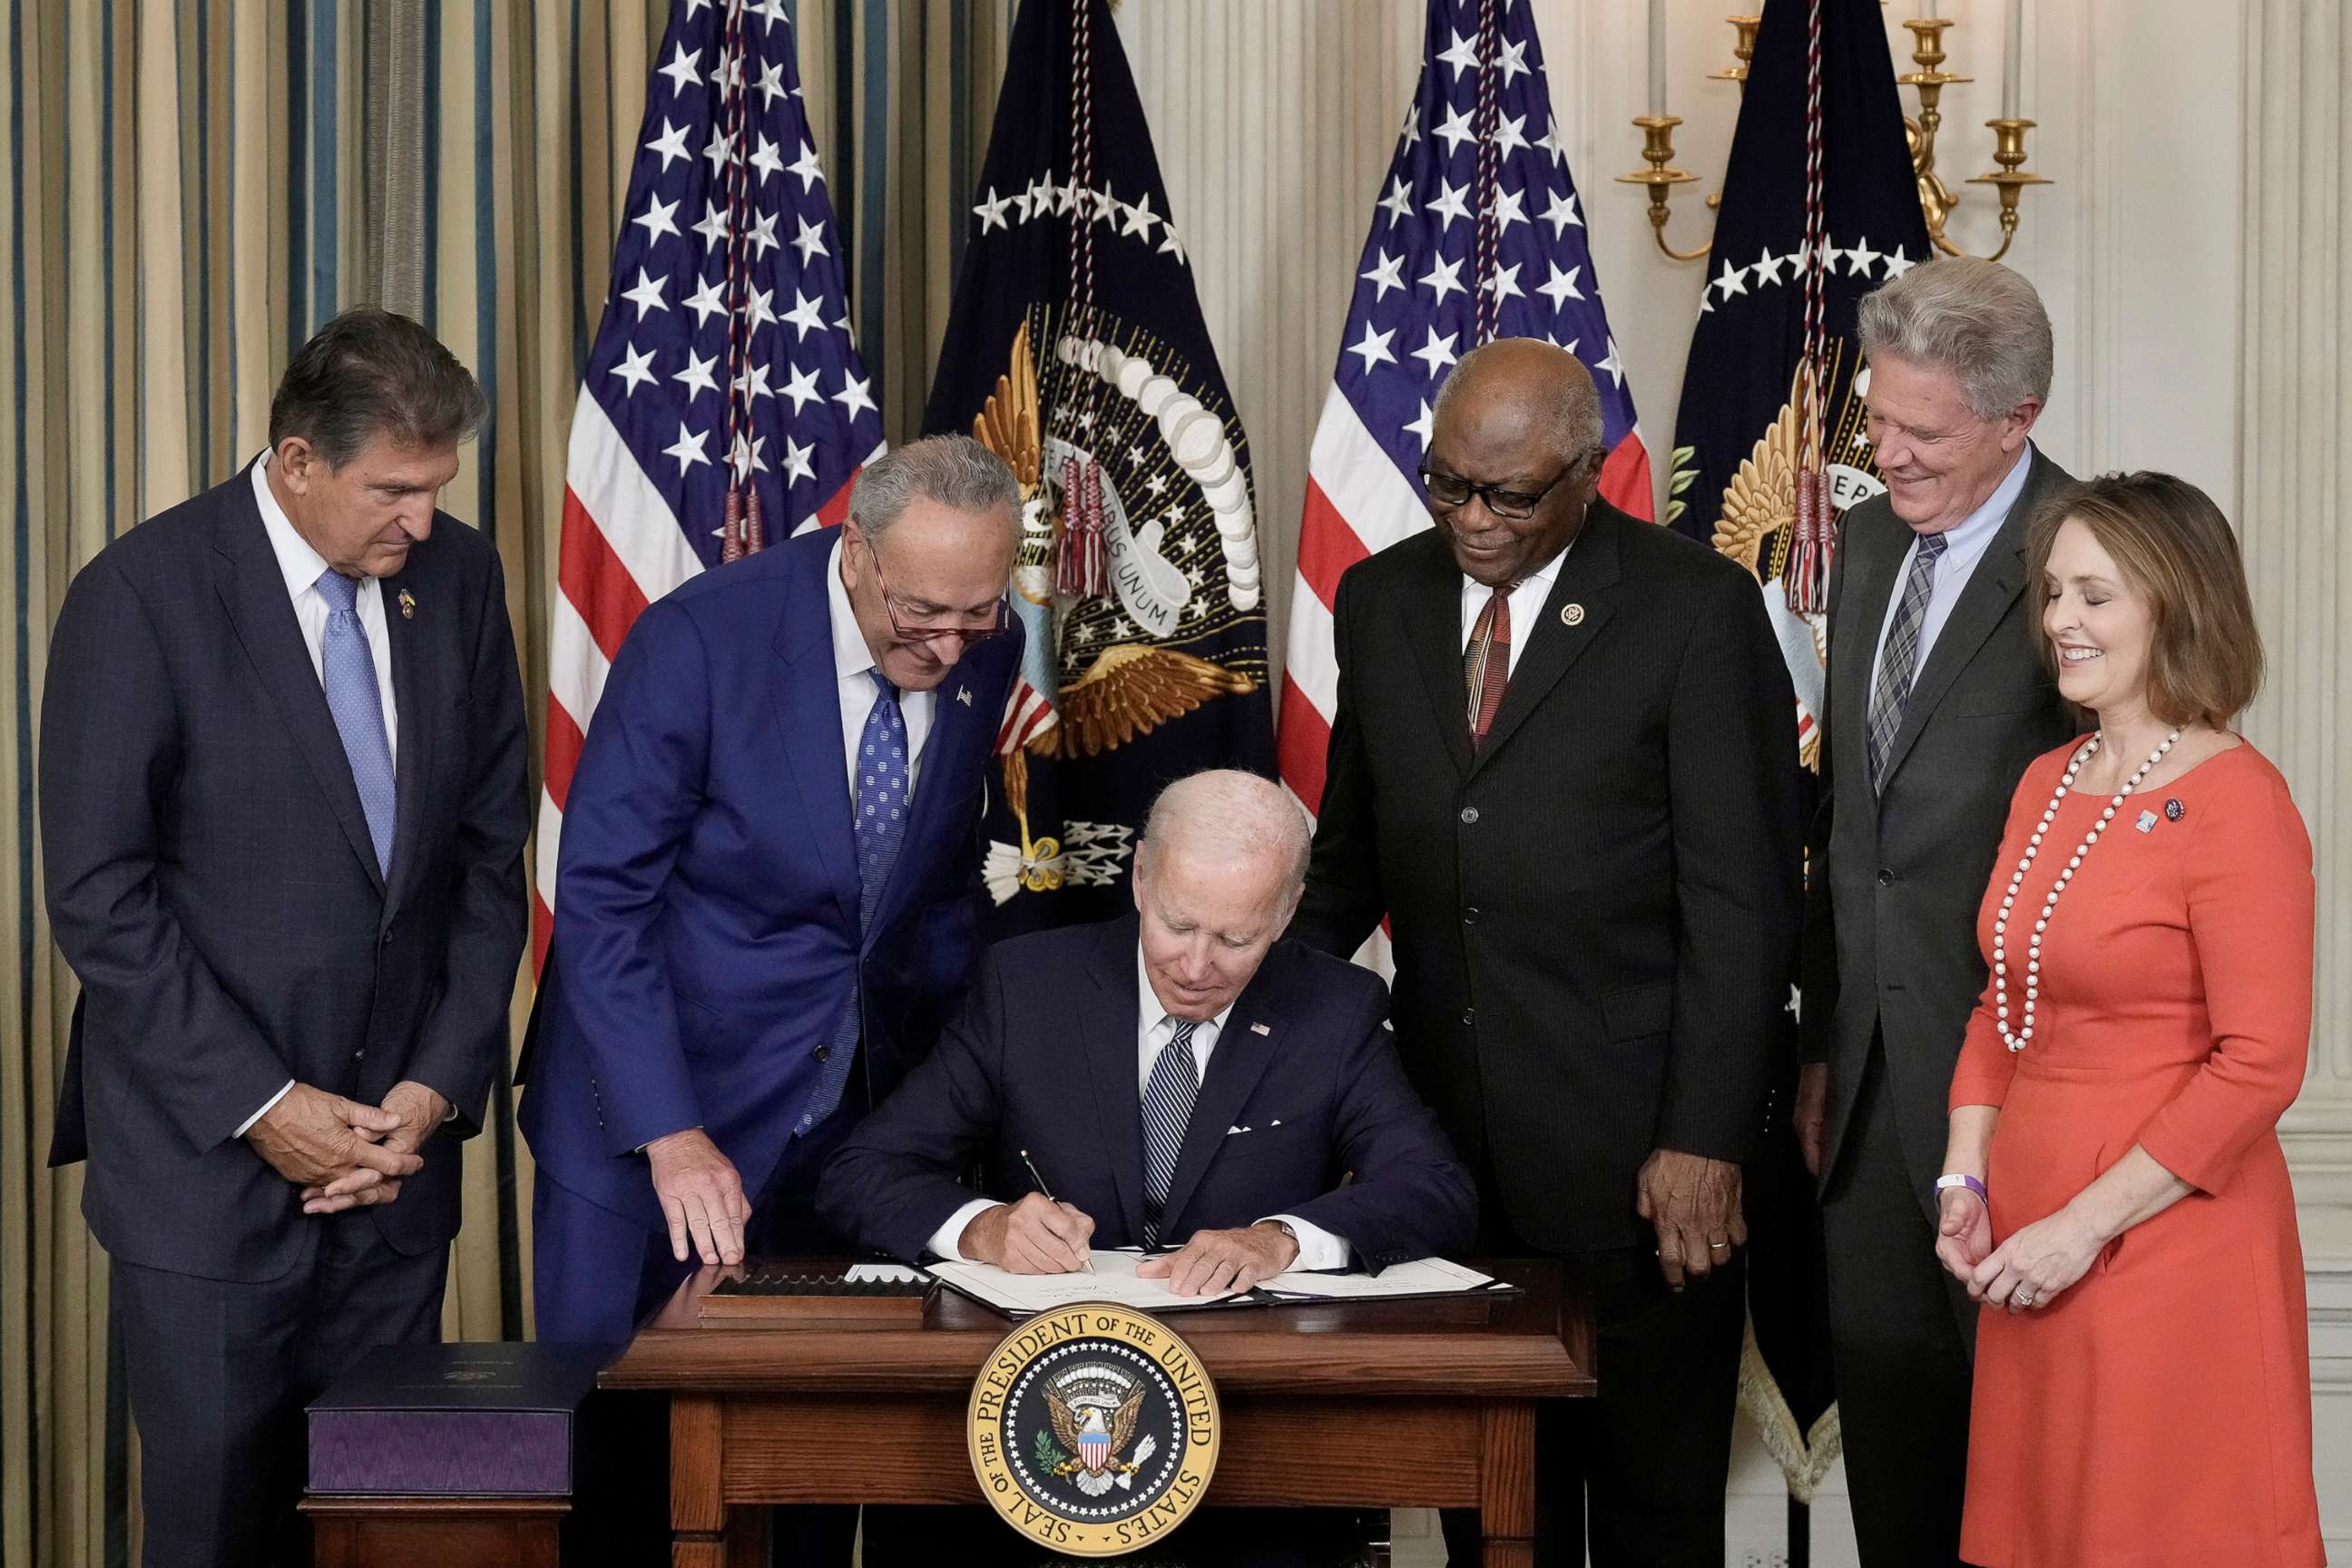 PHOTO: President Joe Biden signs The Inflation Reduction Act with Sen. Joe Manchin, Sen. Charles Schumer, House Whip James Clyburn, Rep. Frank Pallone and Rep. Kathy Catsor in the State Dining Room of the White House August 16, 2022 in Washington, D.C.